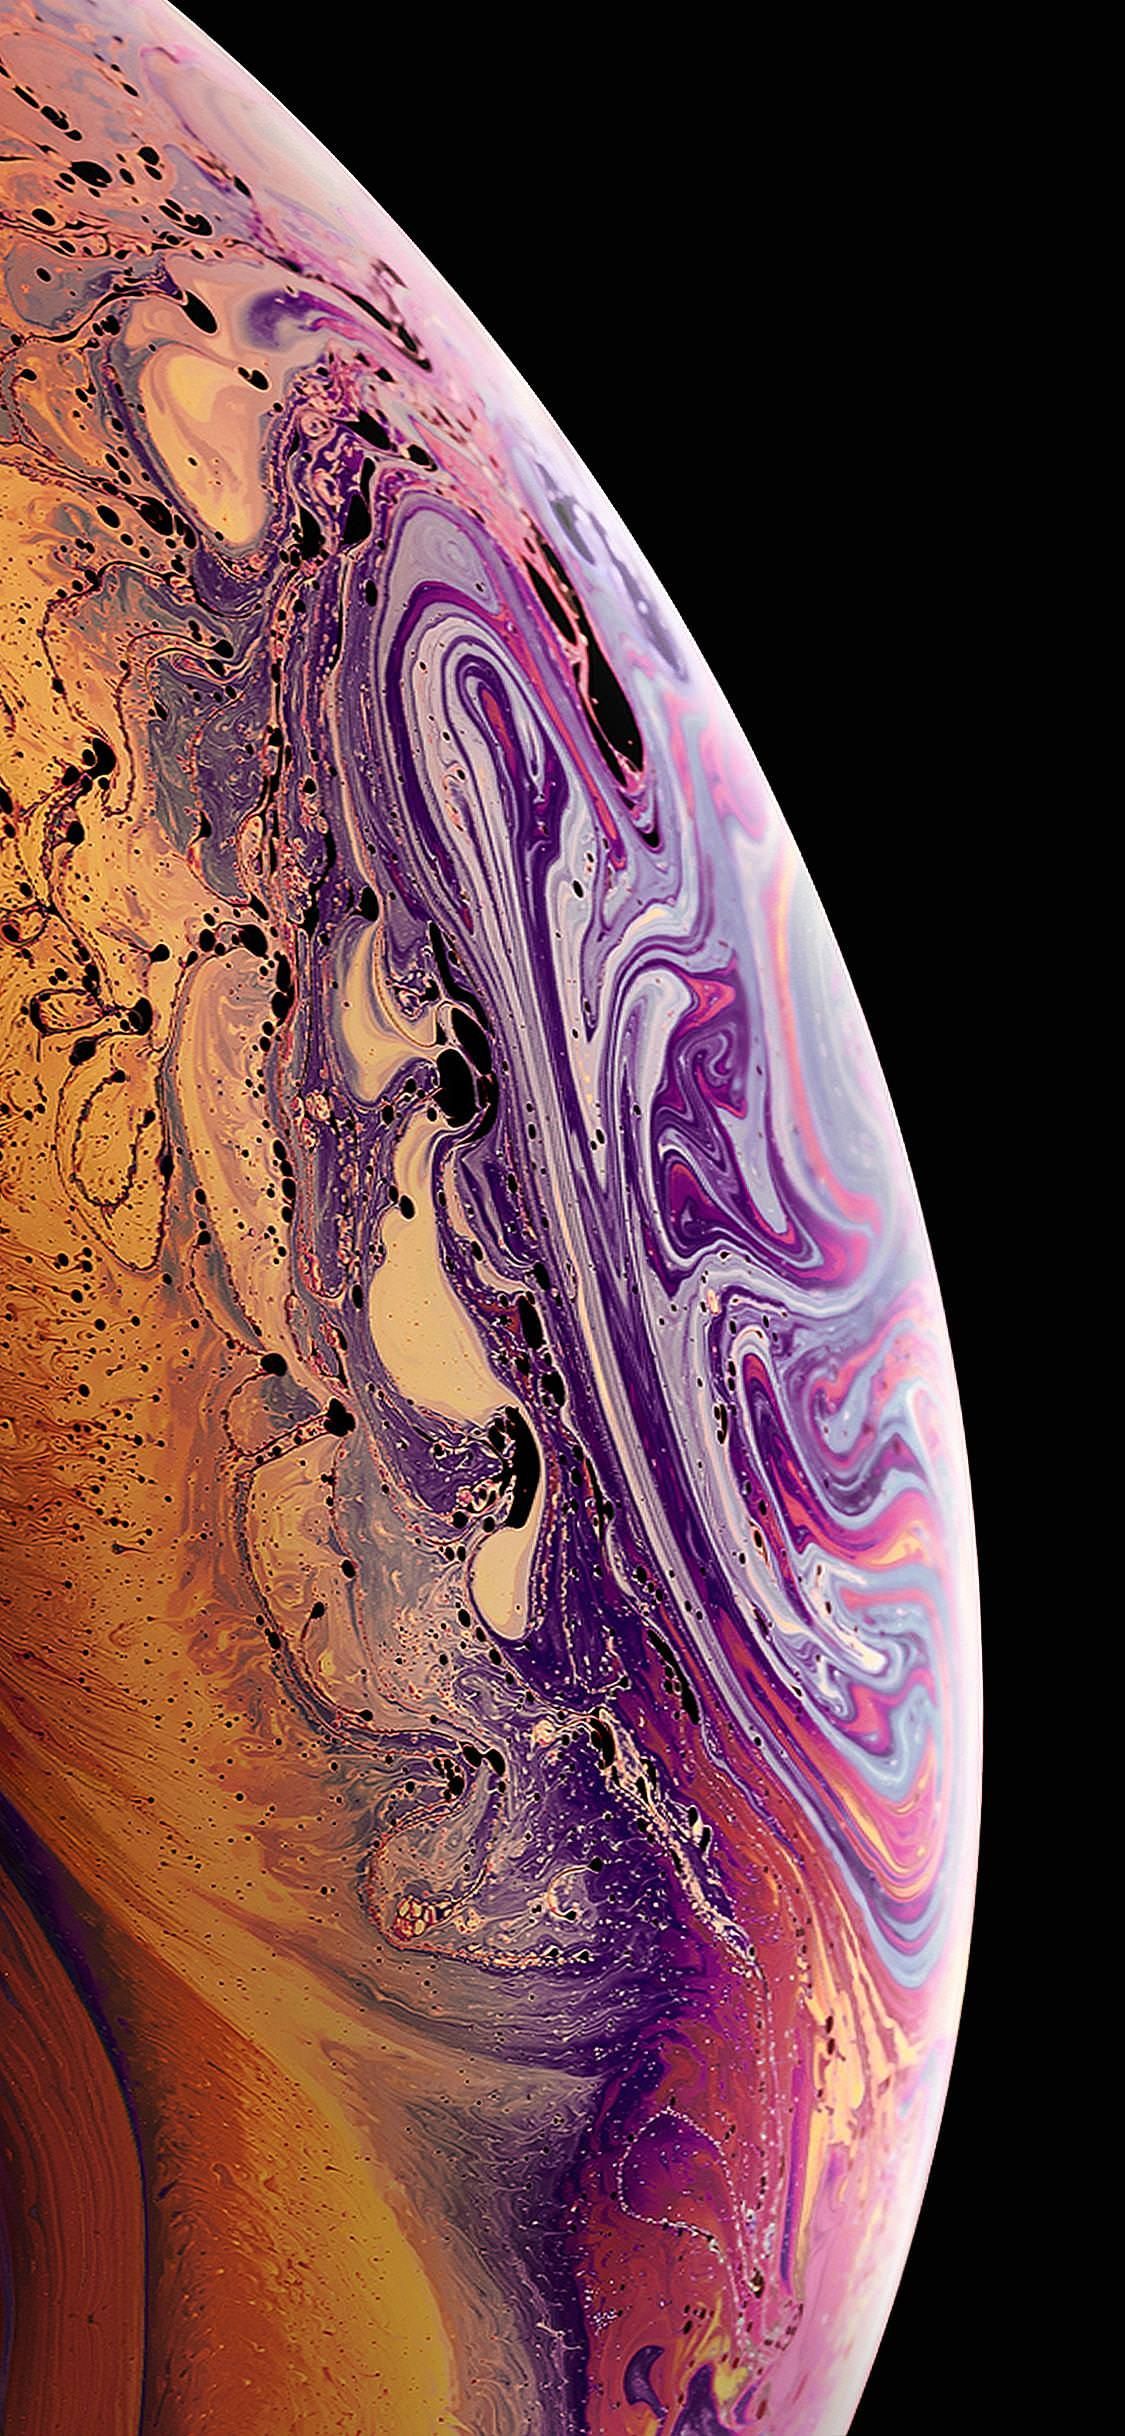 Shop Iphone Xs Max Wallpaper 4k | UP TO 51% OFF